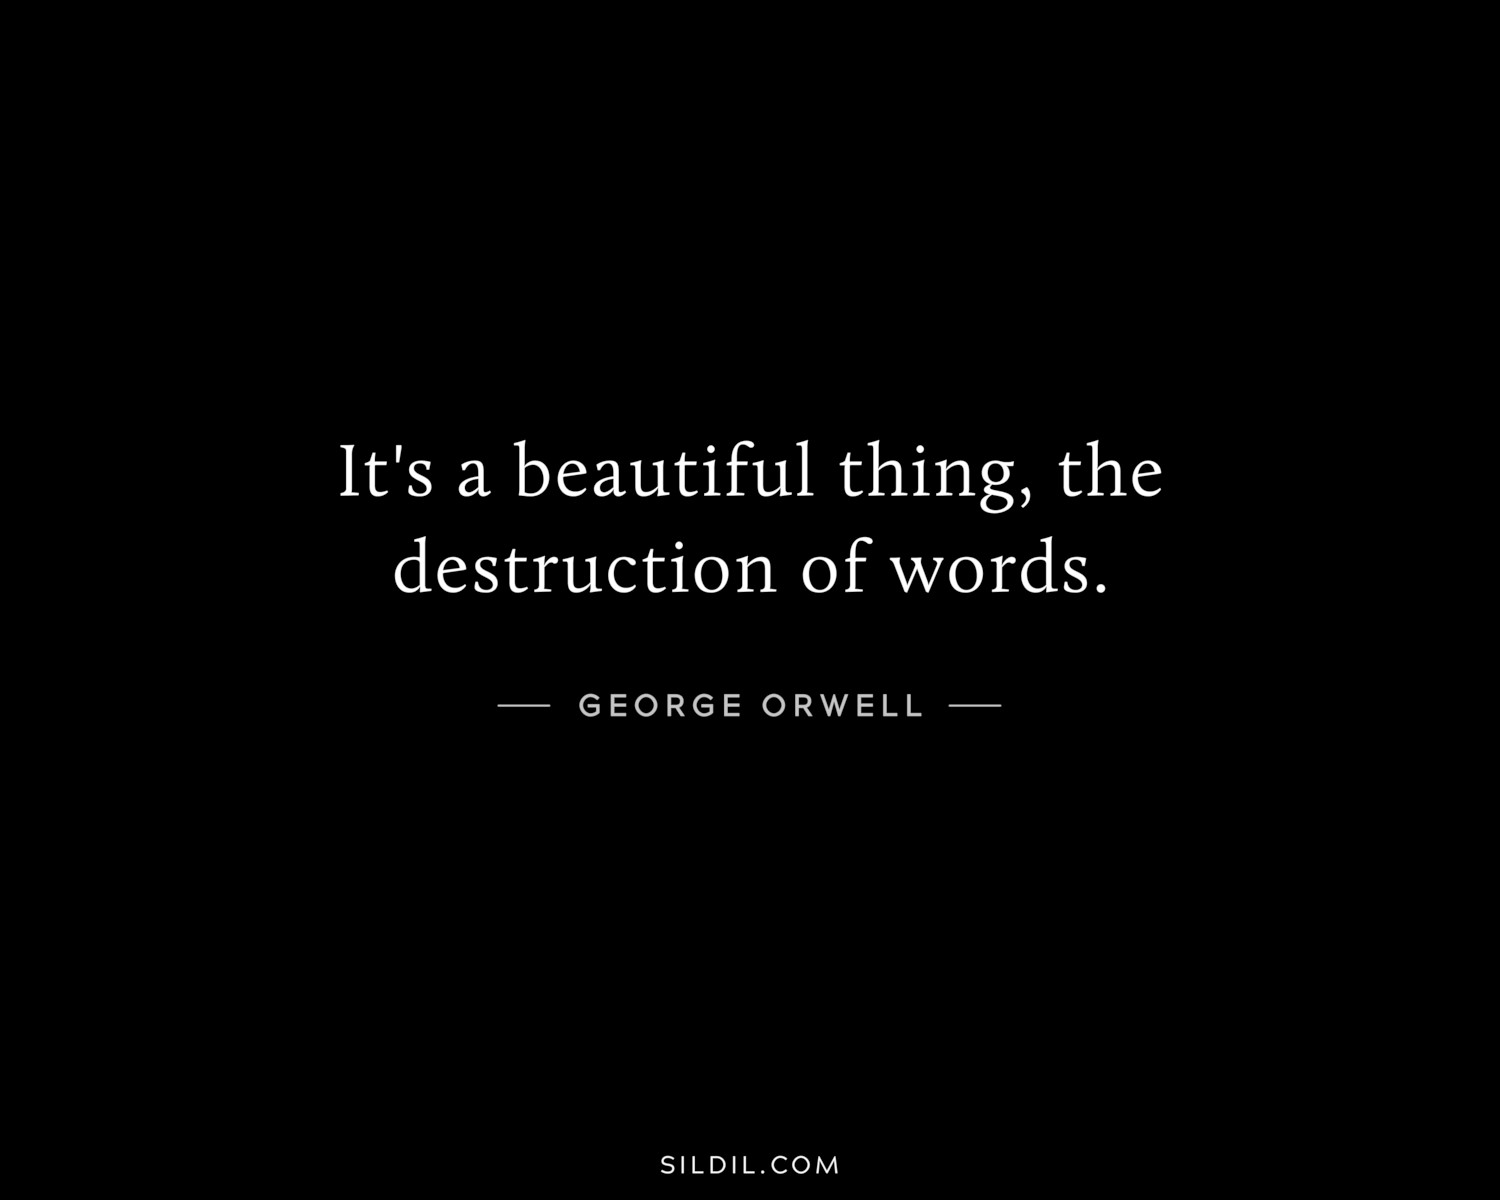 It's a beautiful thing, the destruction of words.